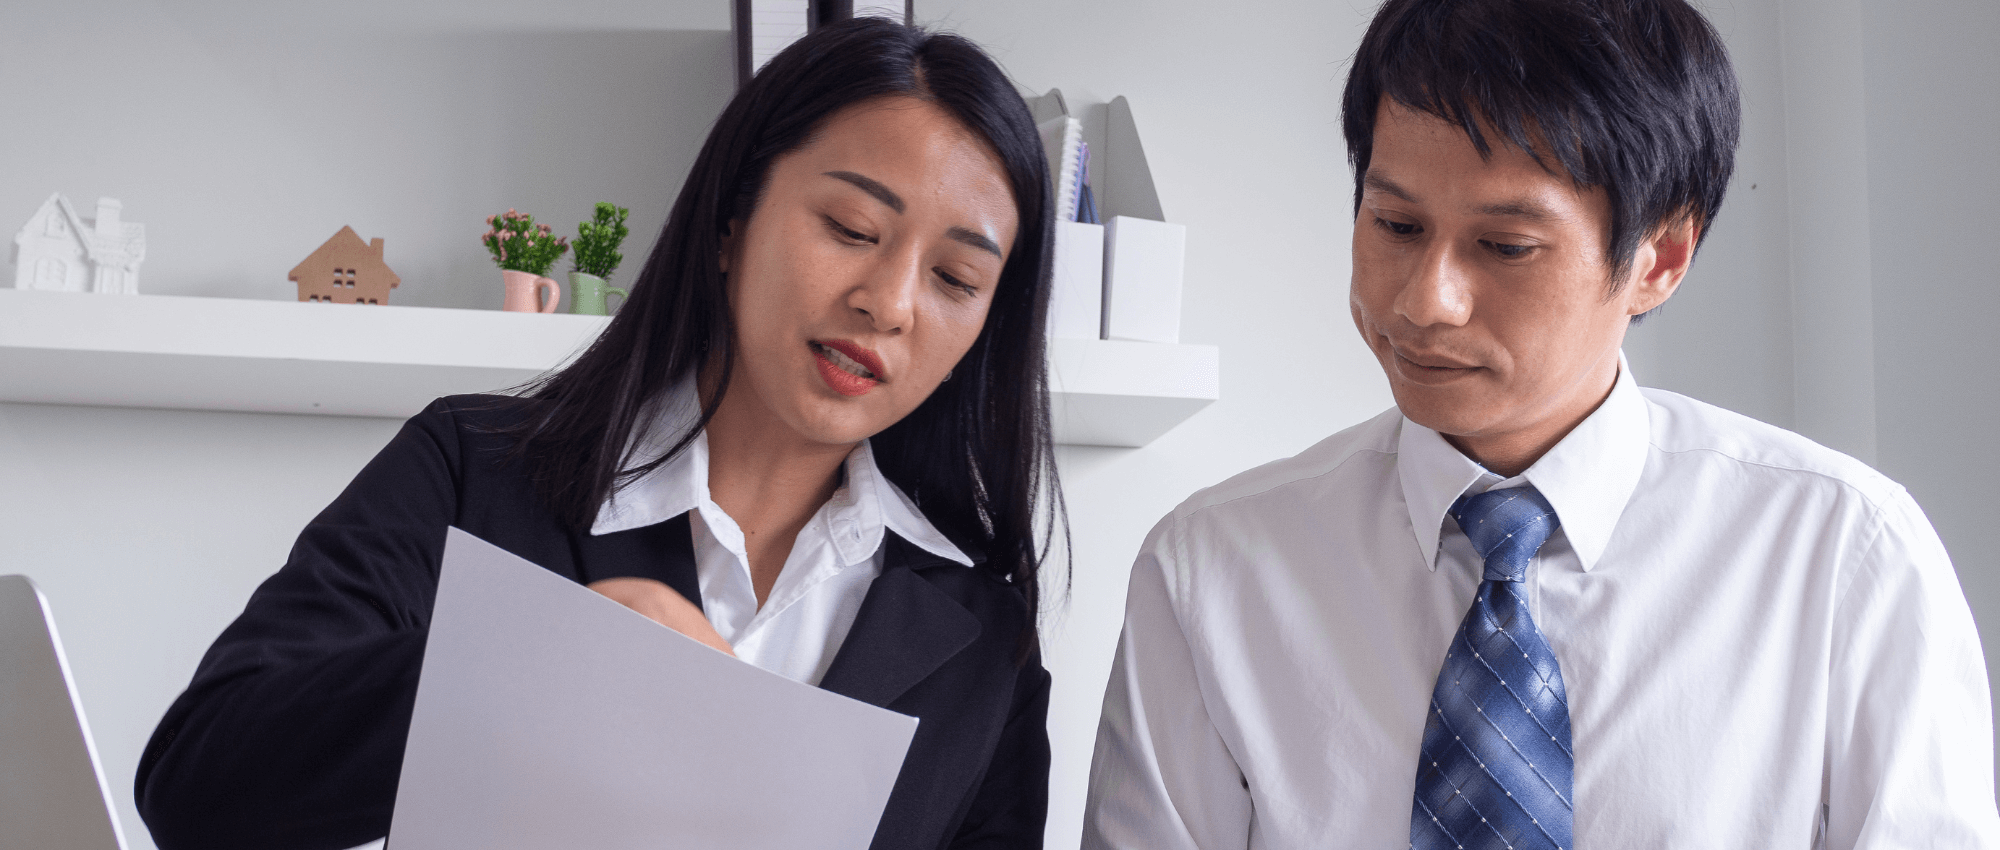 man and woman talking in office